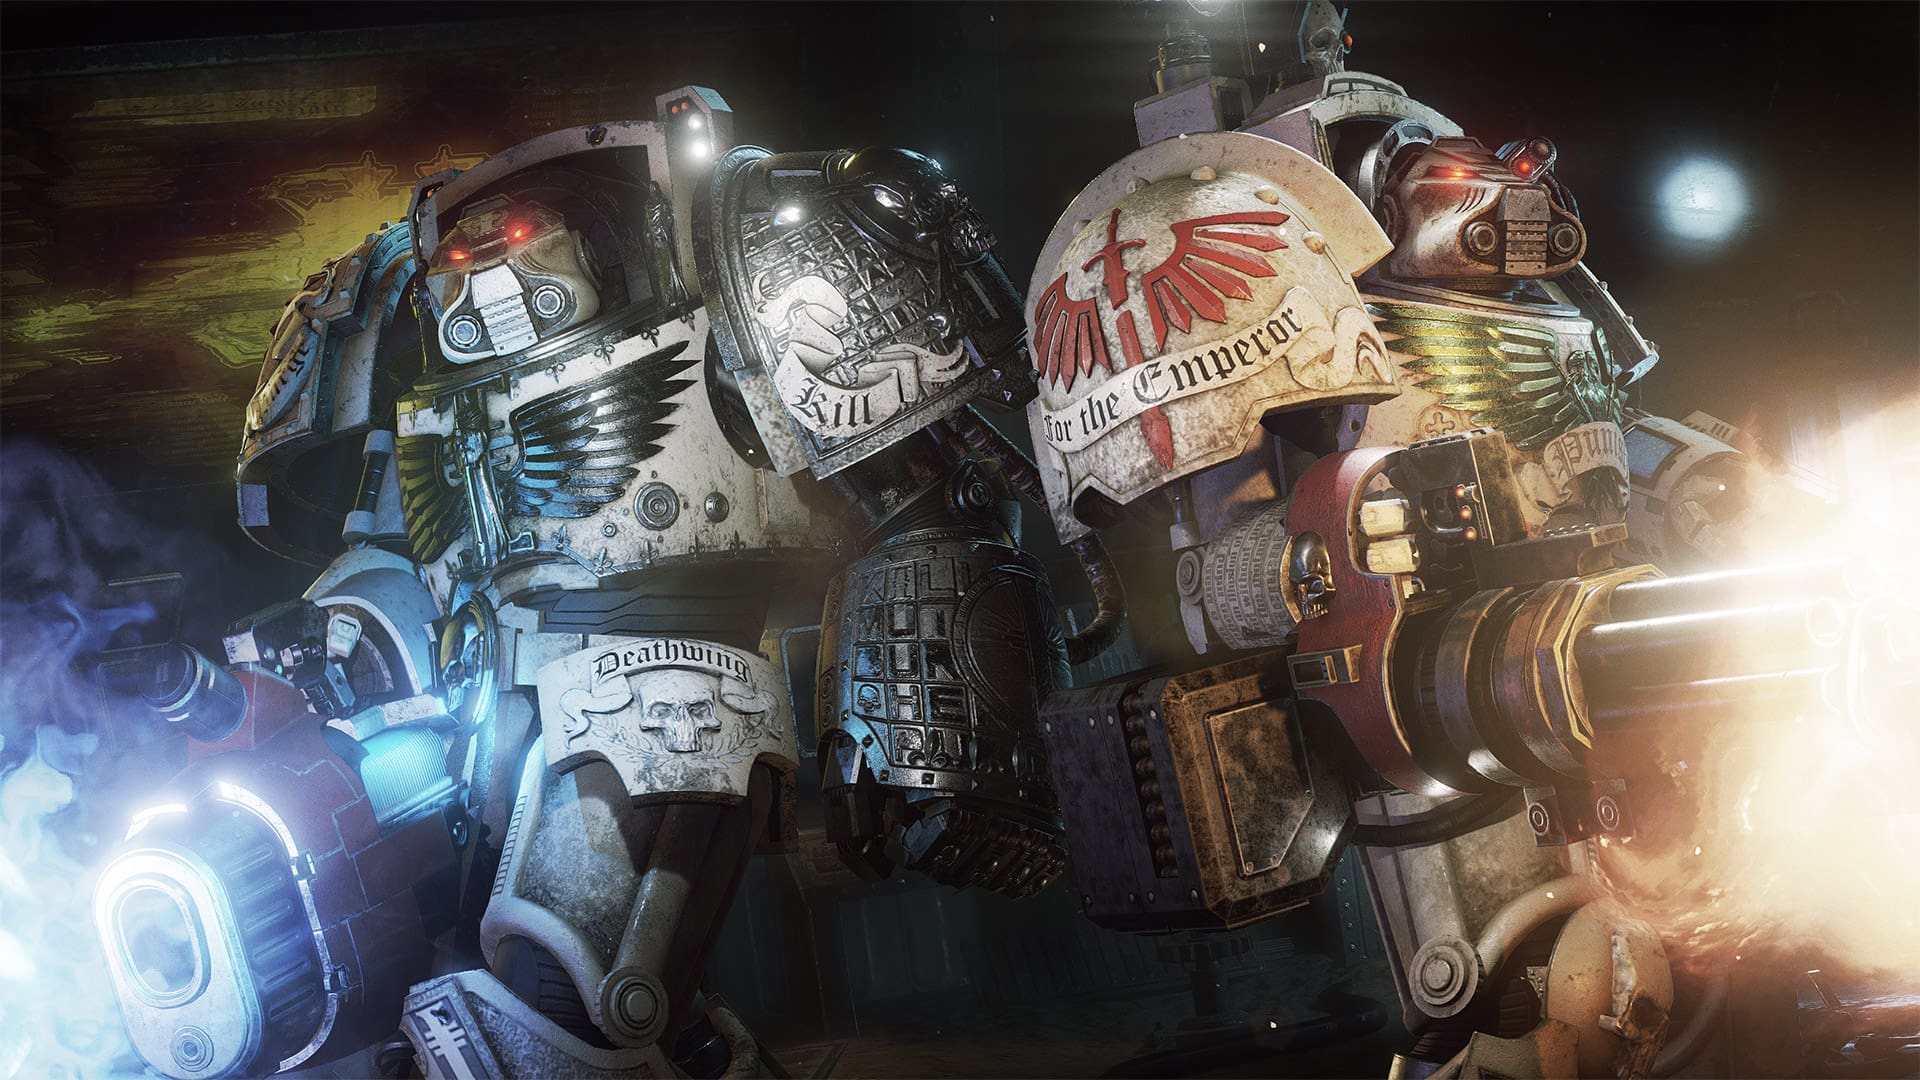 space hulk deathwing xbox one release date